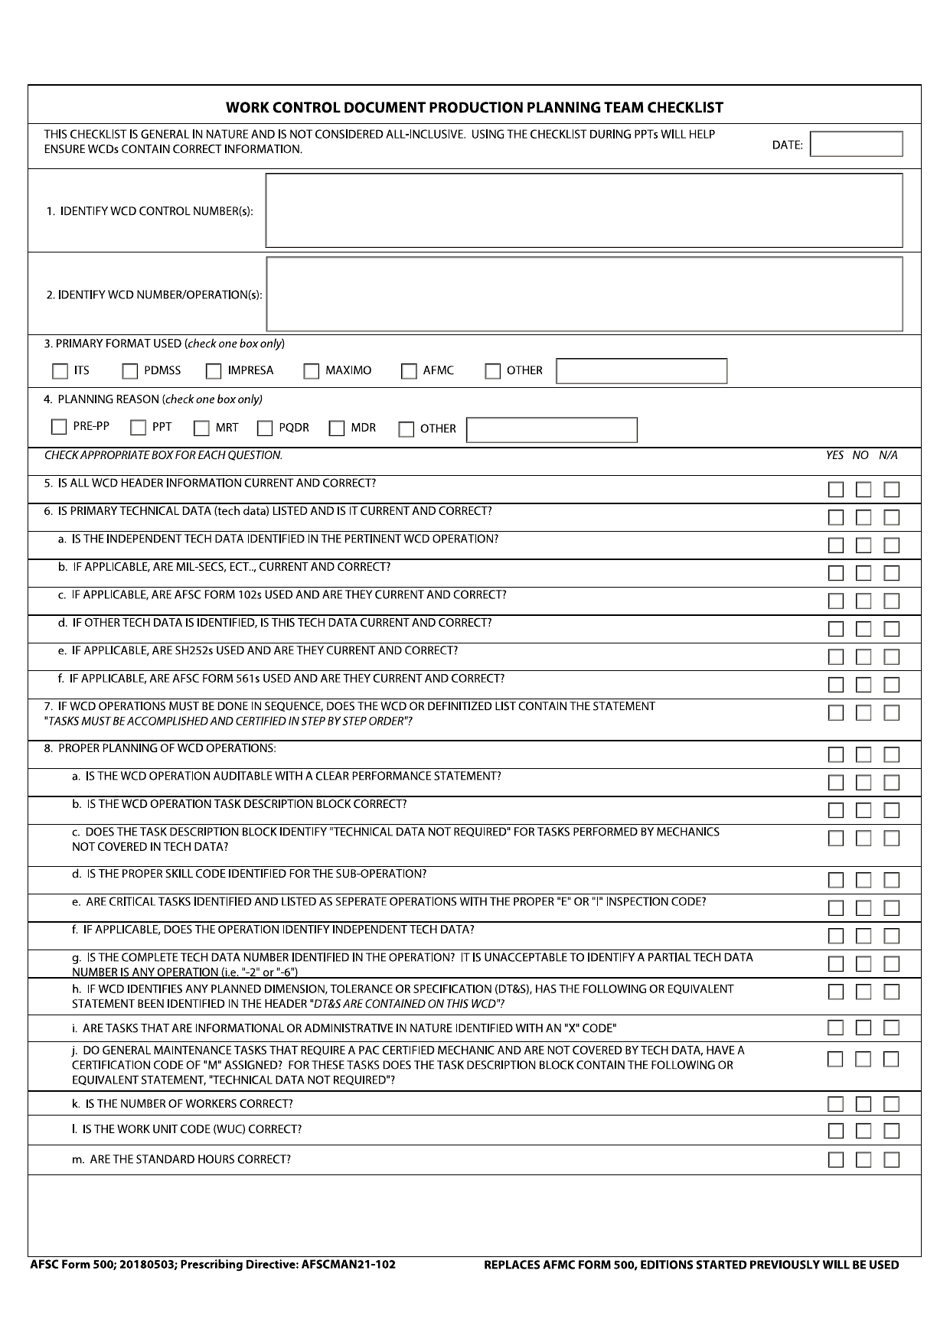 AFSC Form 500 Work Control Document Production Planning Team Checklist, Page 1